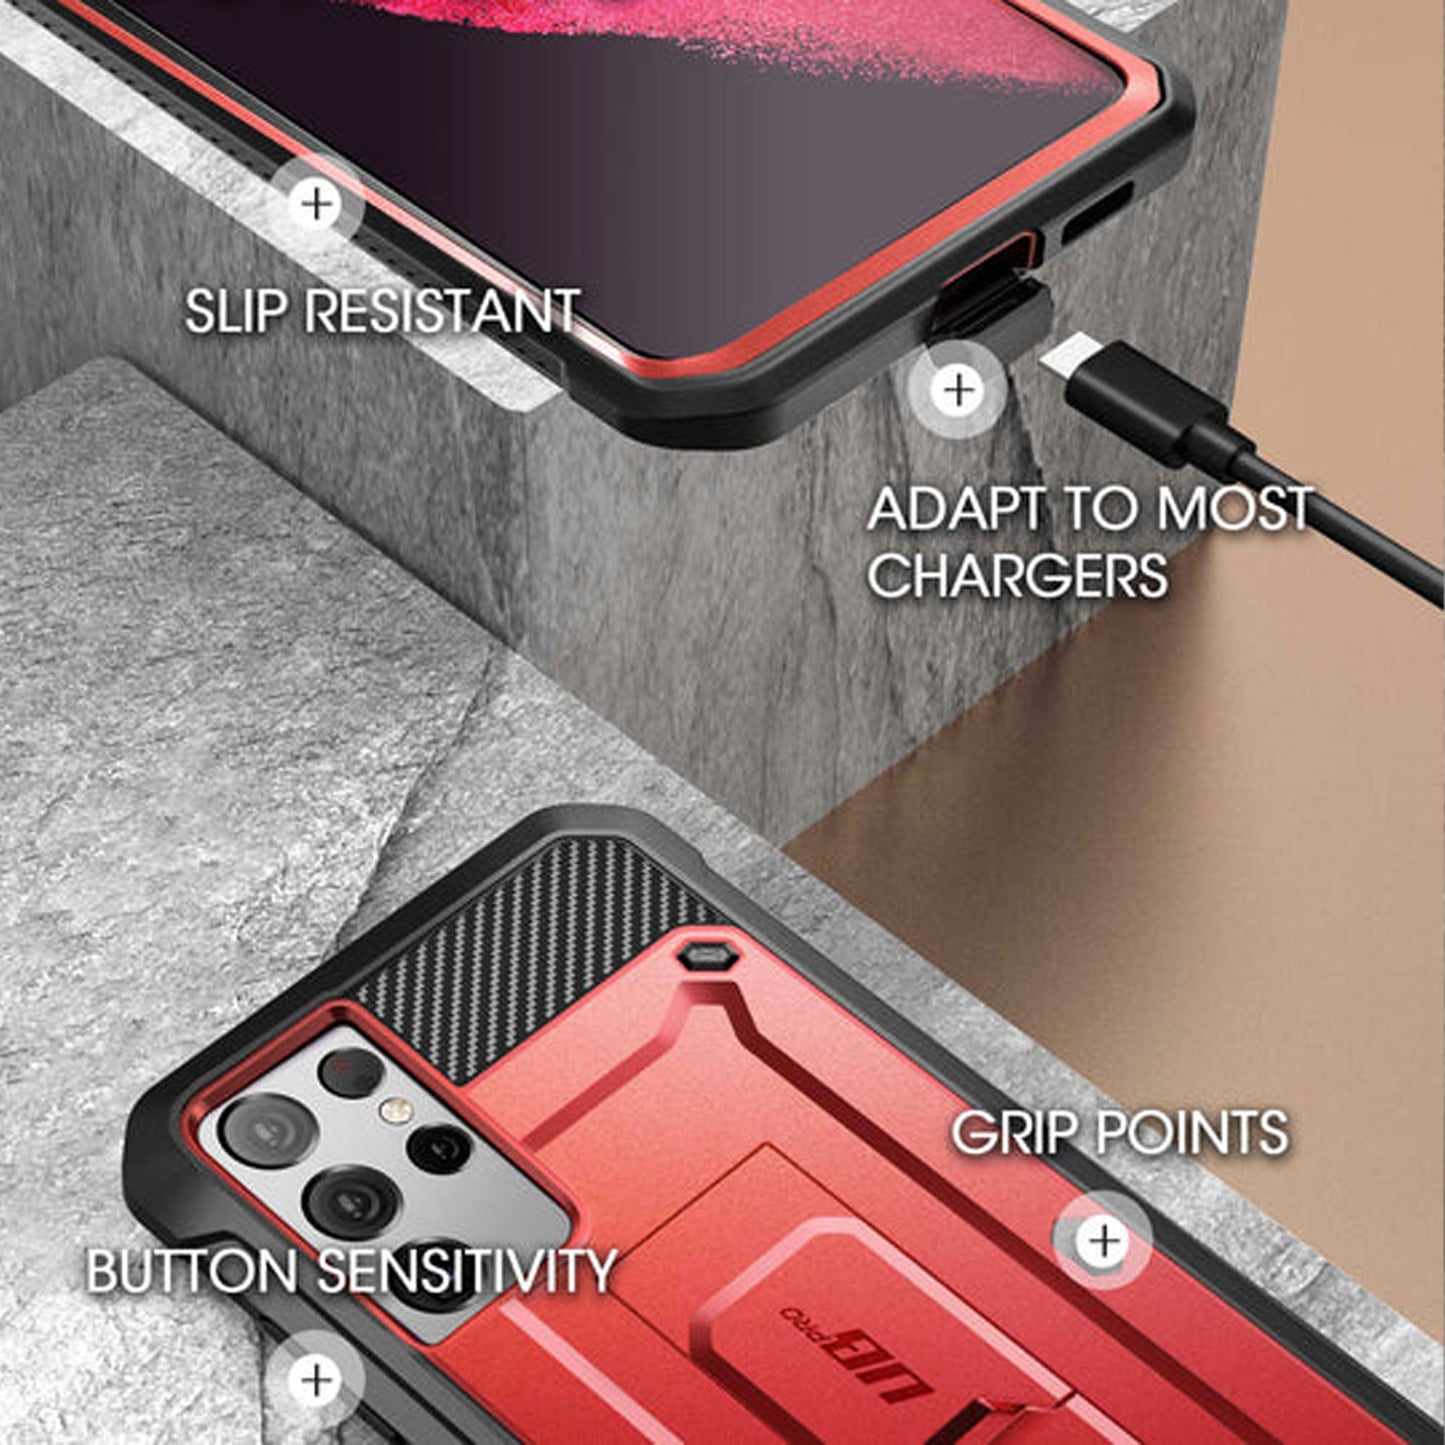 Supcase Unicorn Beetle Pro Rugged Case for Samsung Galaxy S21 Ultra - Metallic Red (Barcode: 843439136007 )